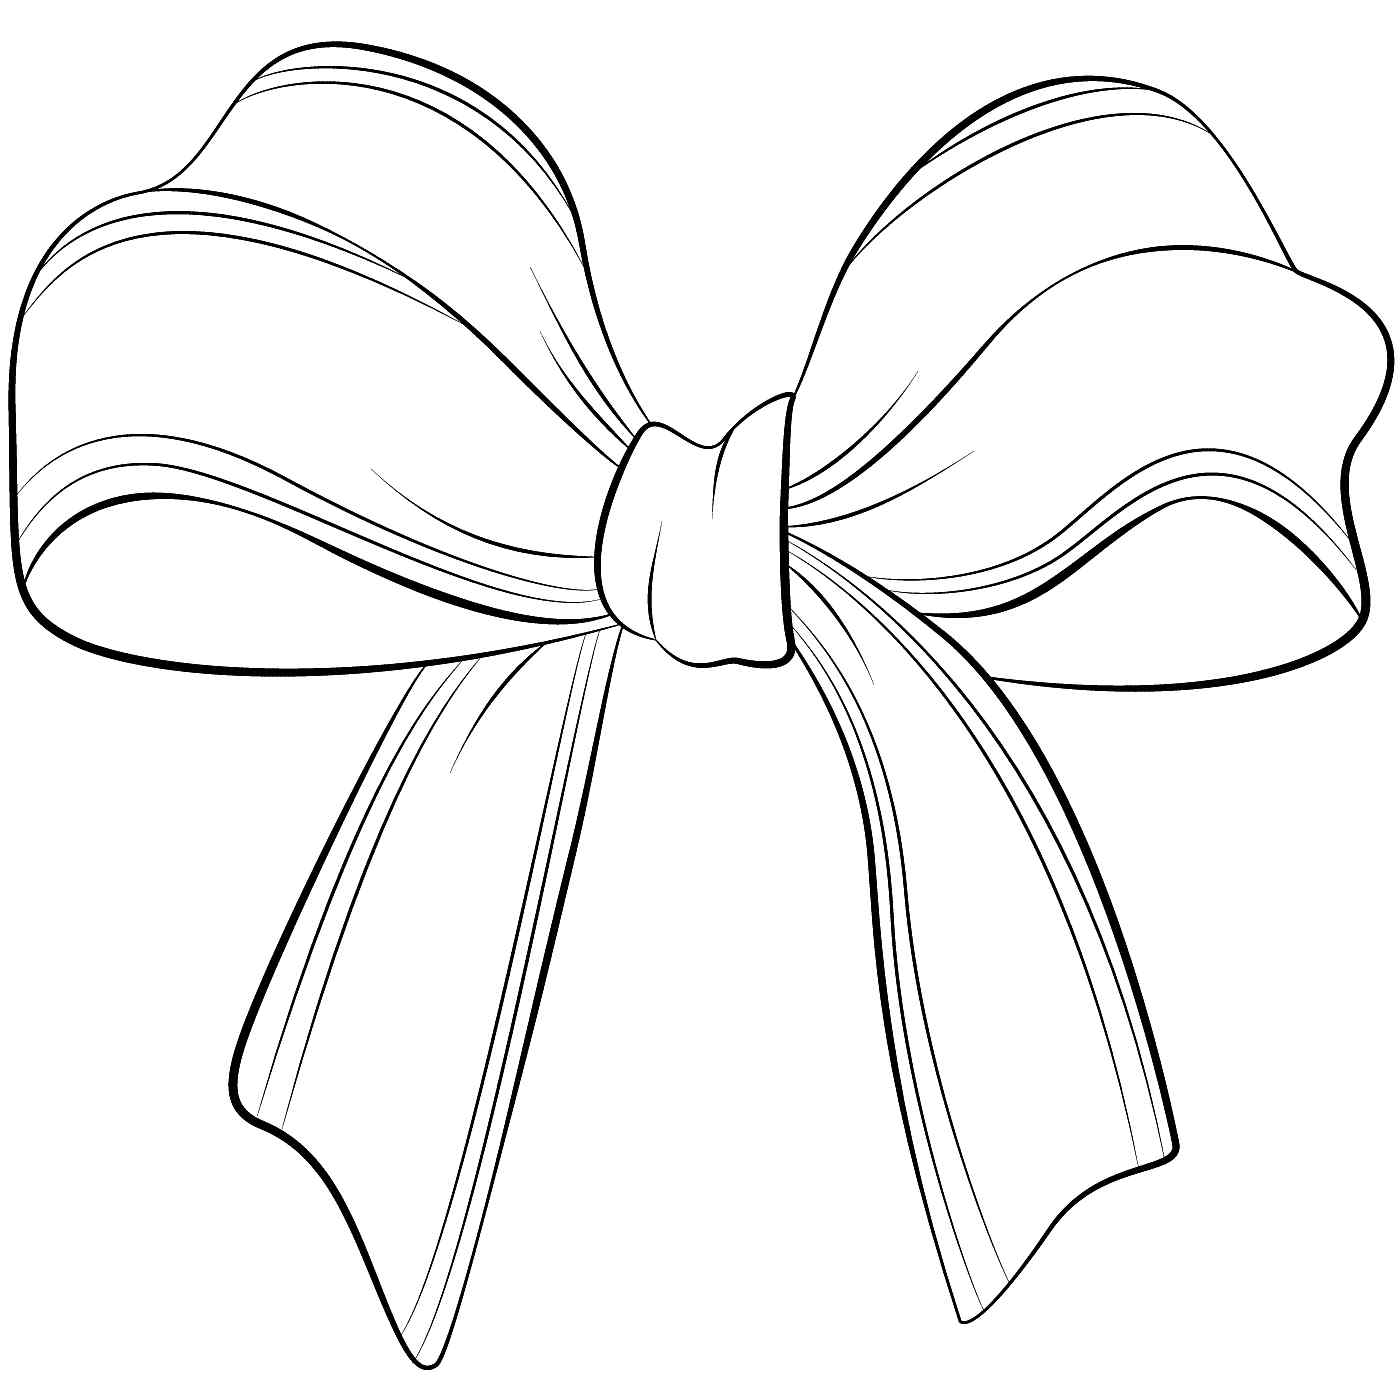 Simple Ribbon Bow Coloring Pages - Coloring Cool